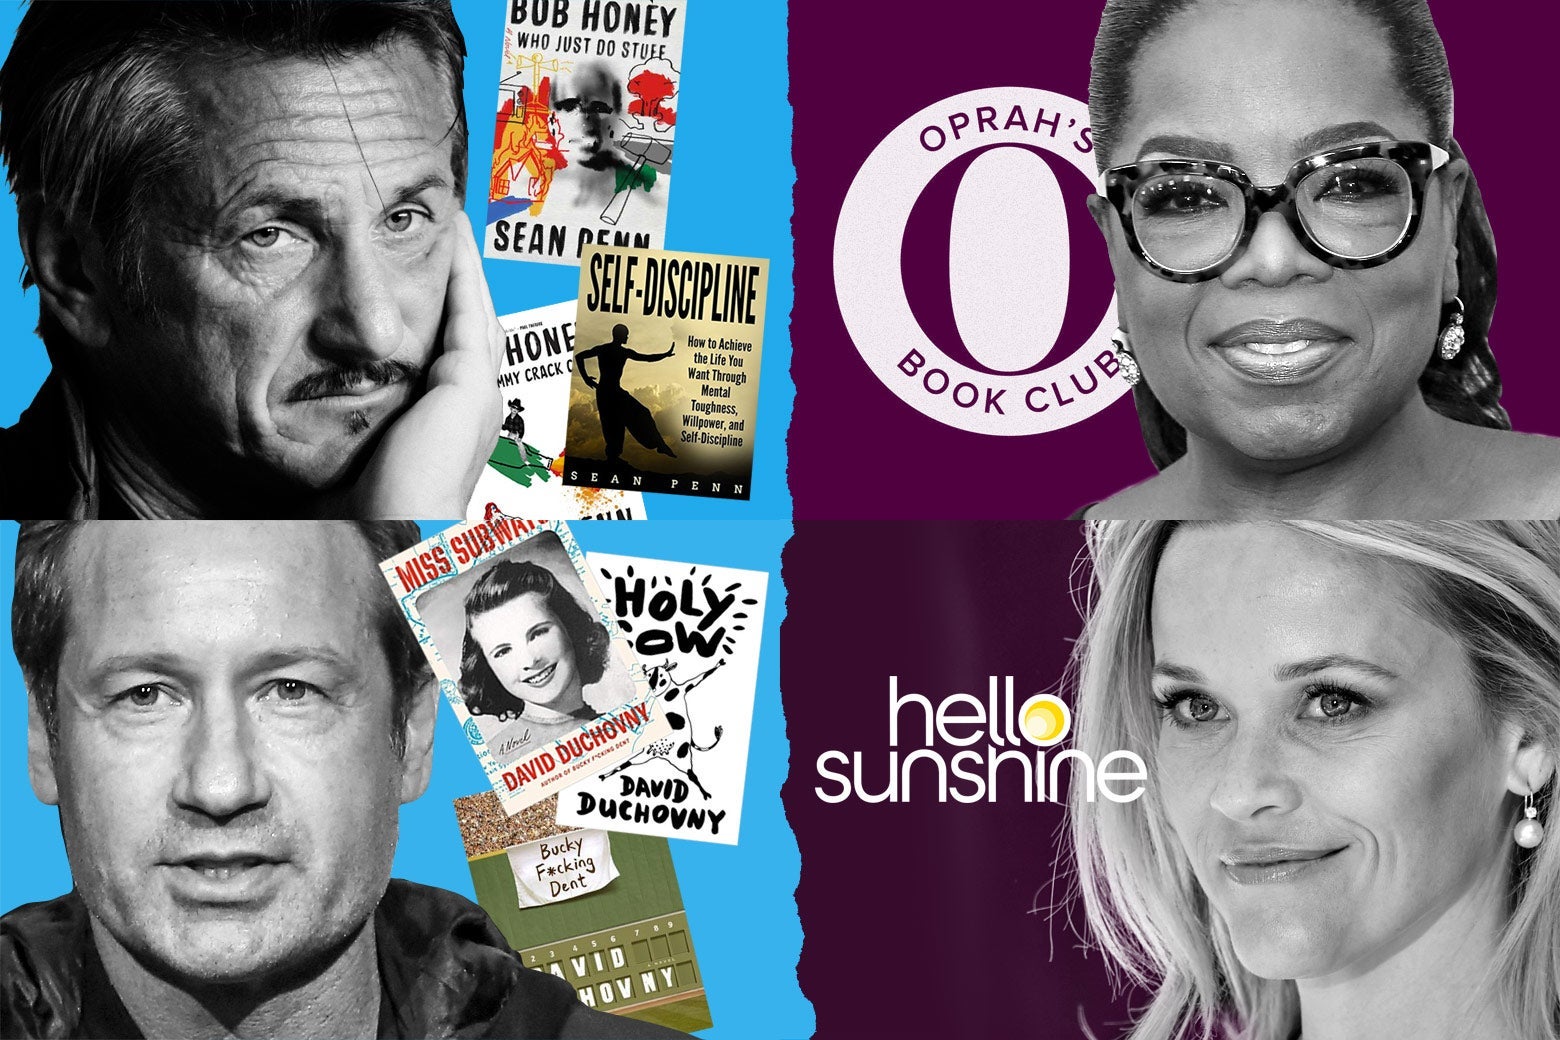 Photo illustration of Sean Penn and David Duchovny with books they've written next to Oprah and Reese Witherspoon with their book club logos.